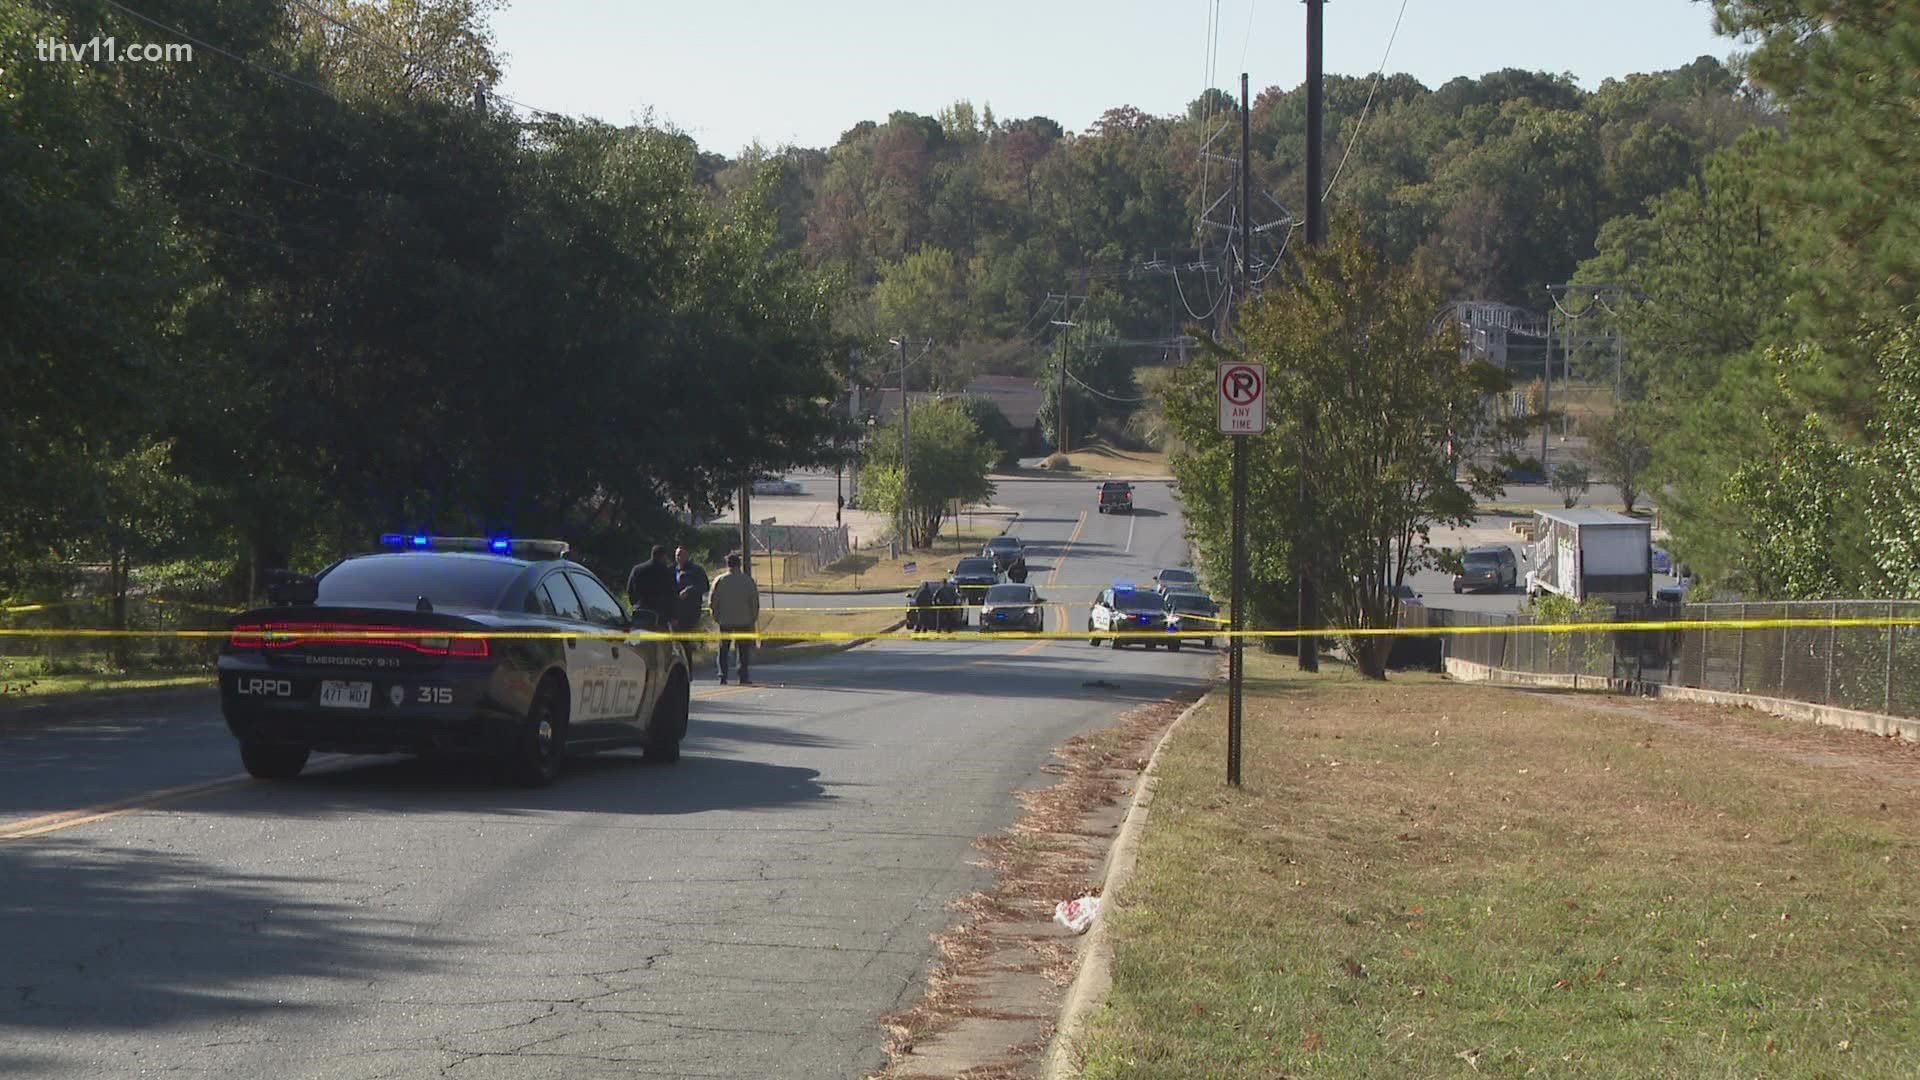 Little Rock police have started investigating a homicide that happened on S. Bryant Street around 8:31 a.m.